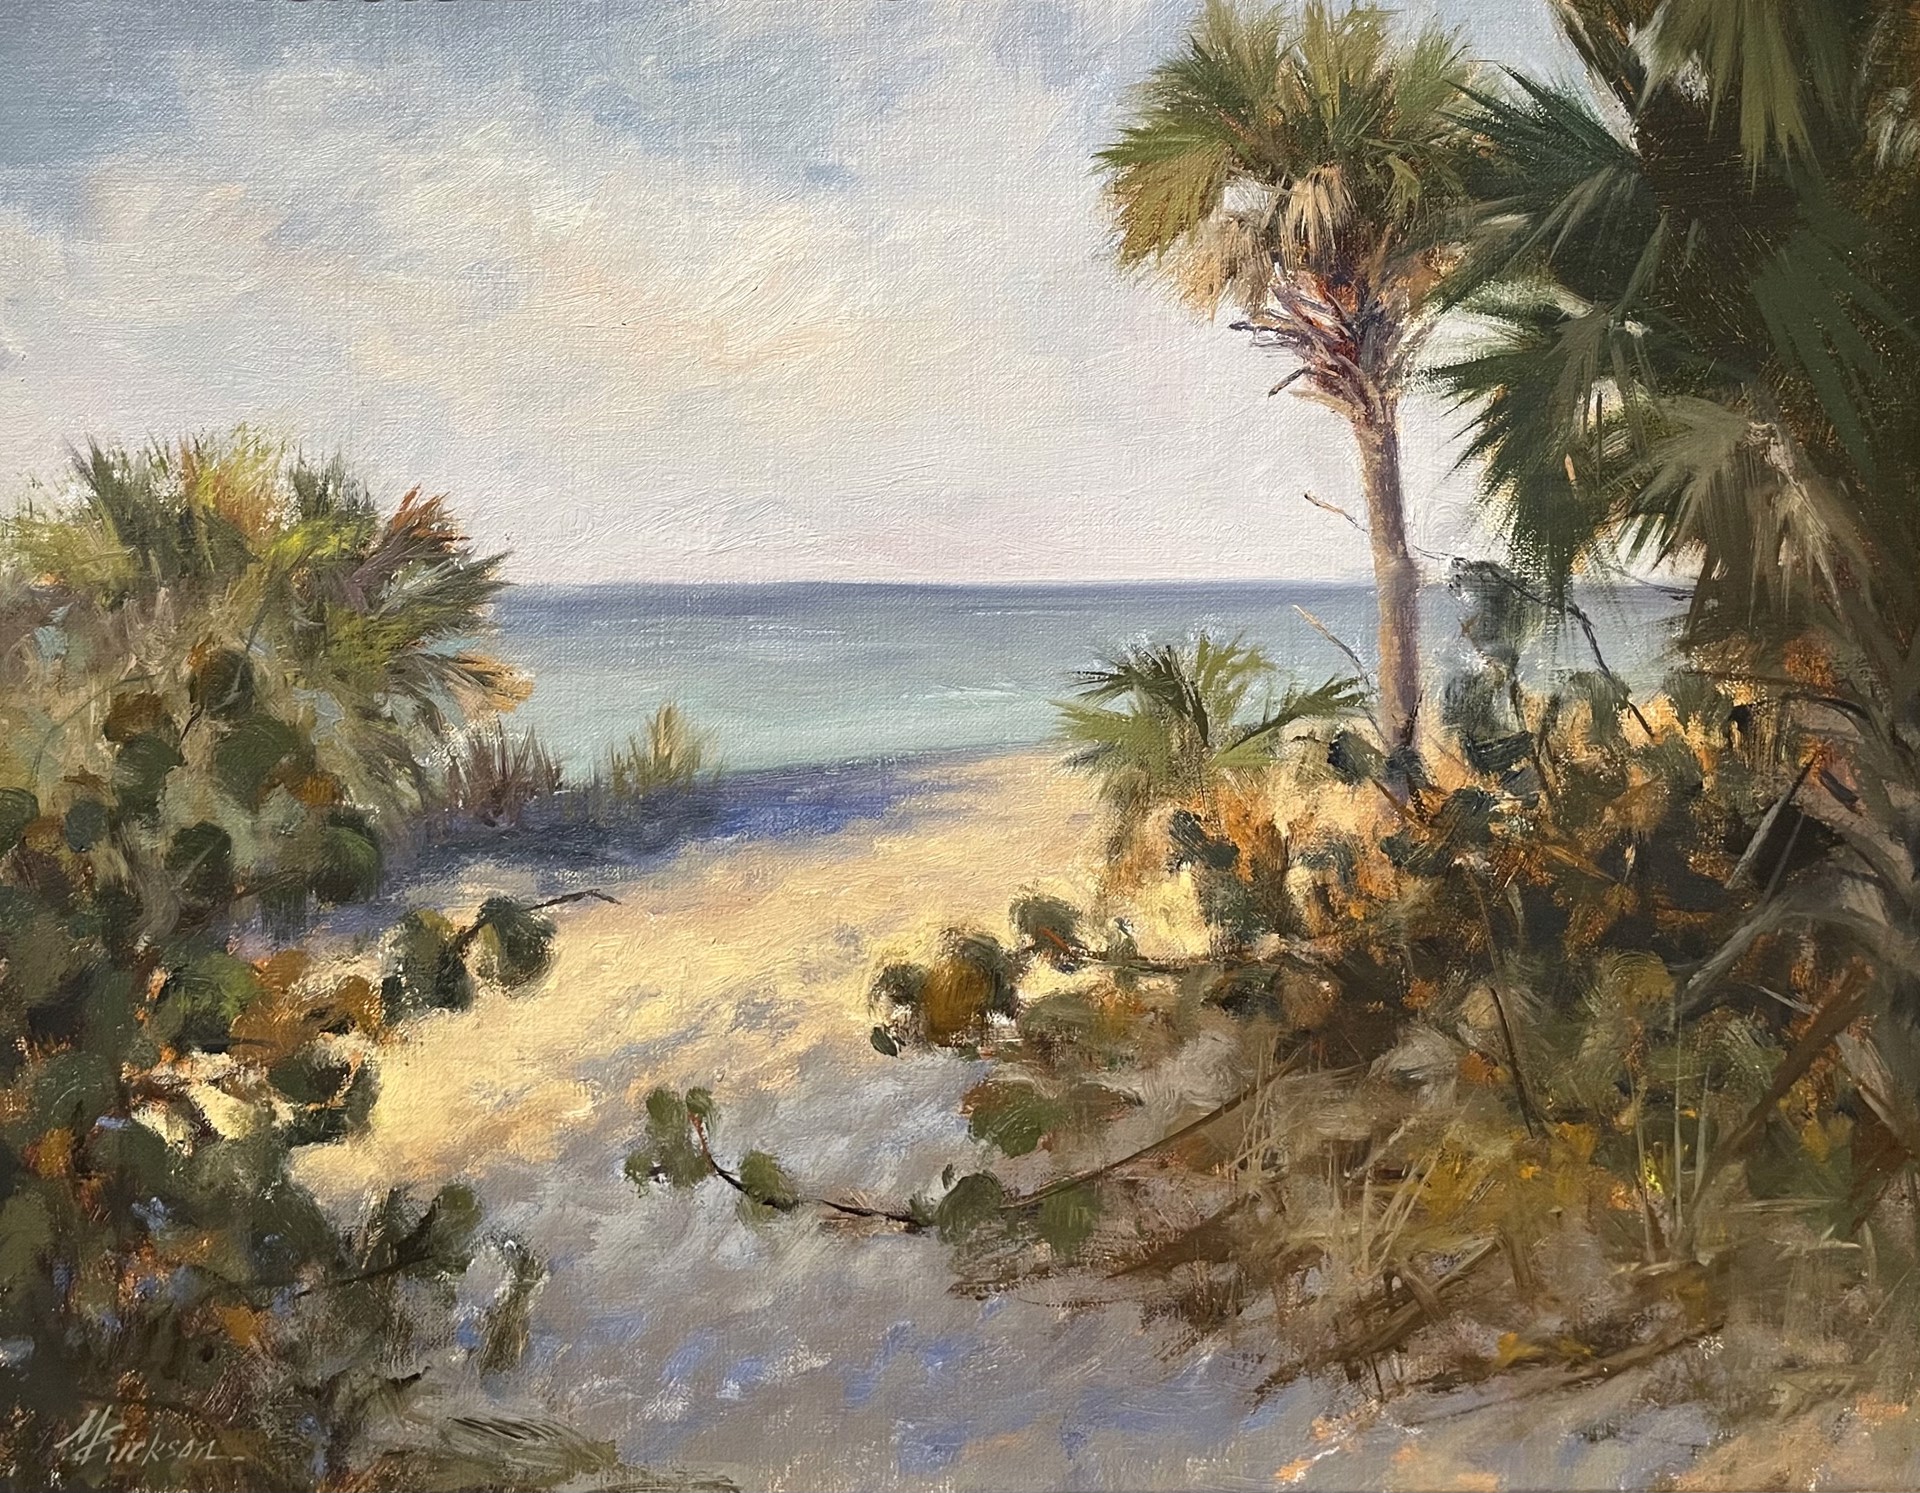 Palms and Sea Grapes